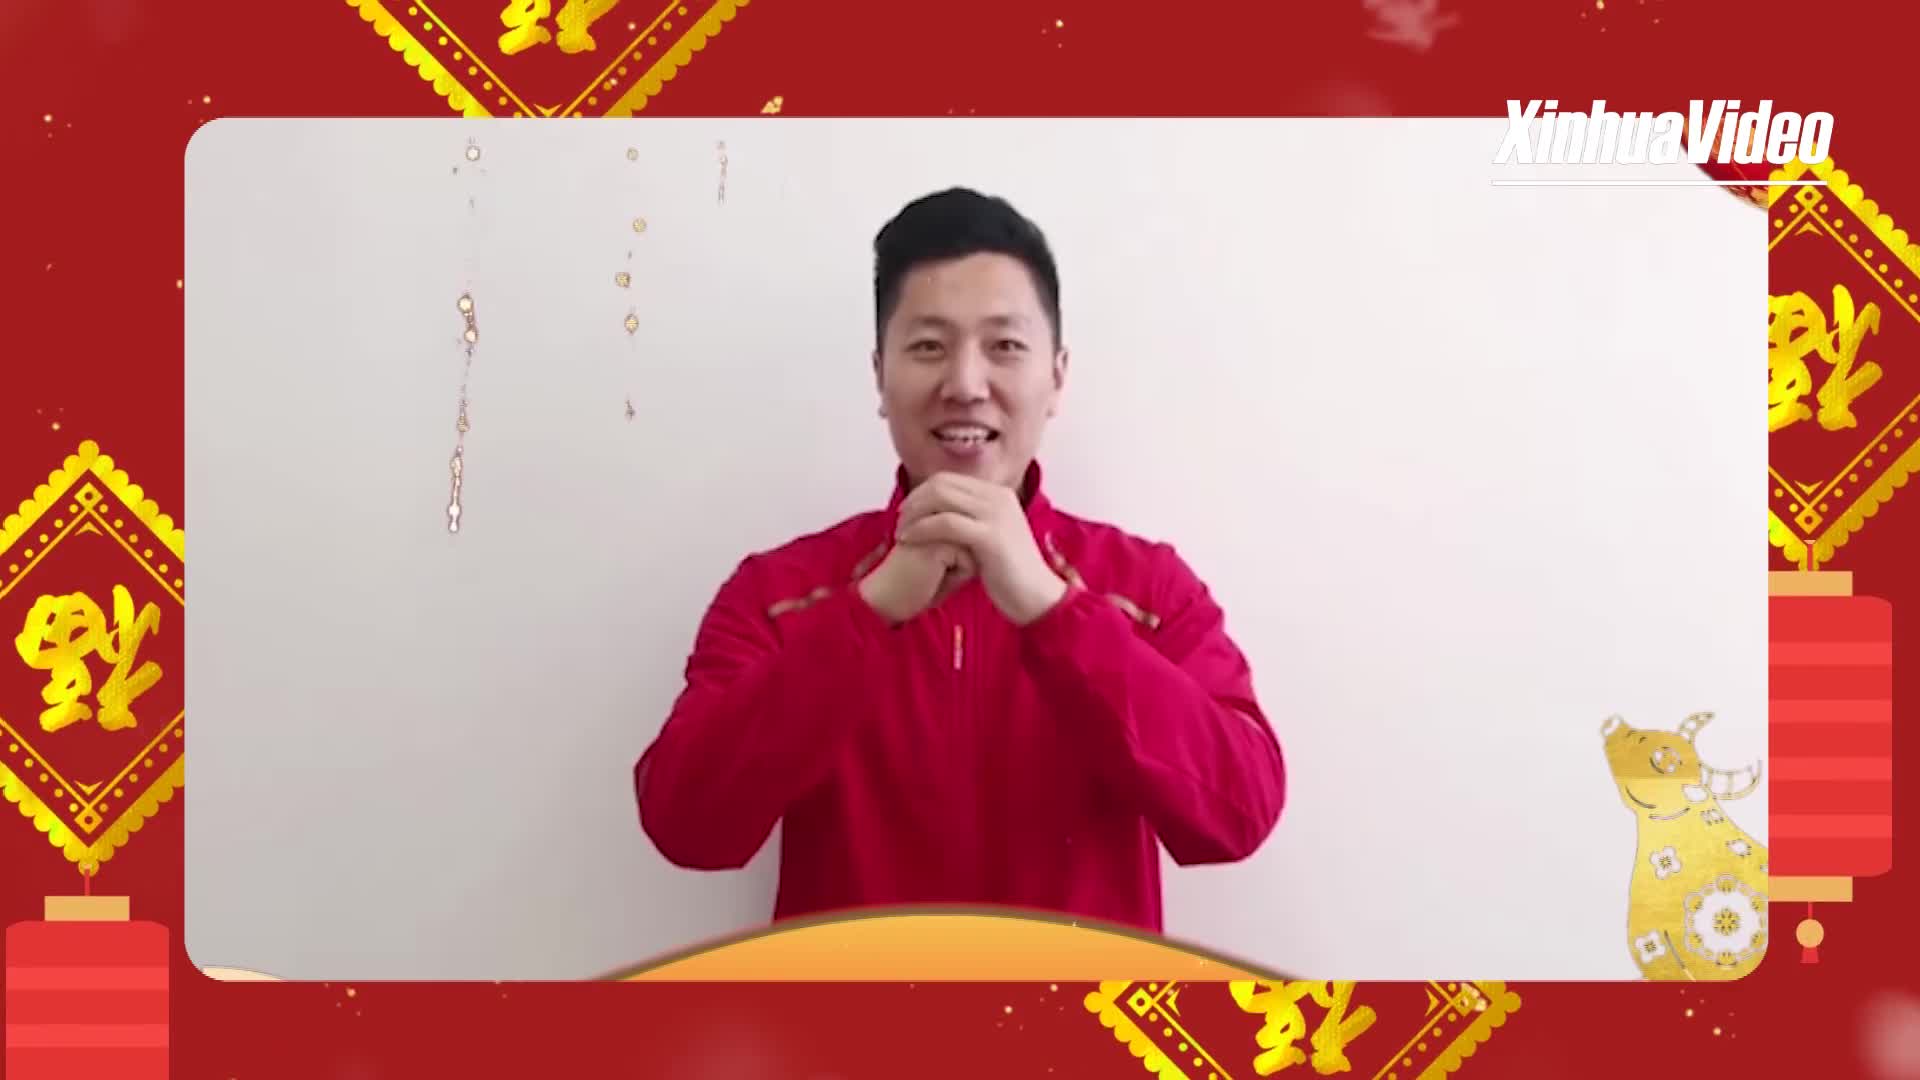 Fist-and-palm salute, a traditional Chinese greeting etiquette